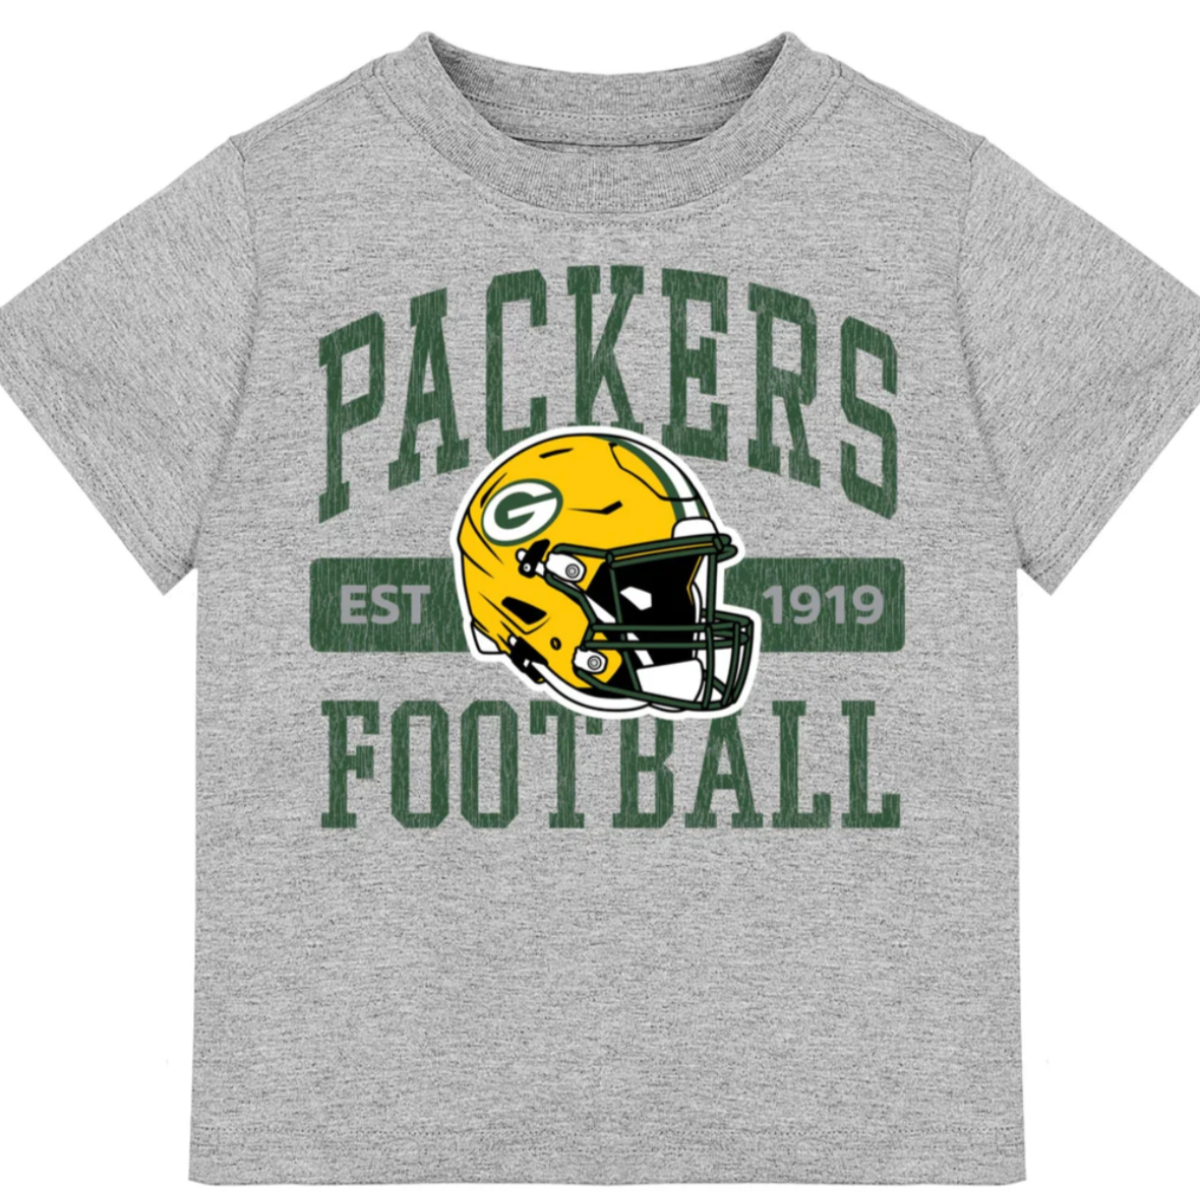 Green Bay Packers Tee - NFL Official